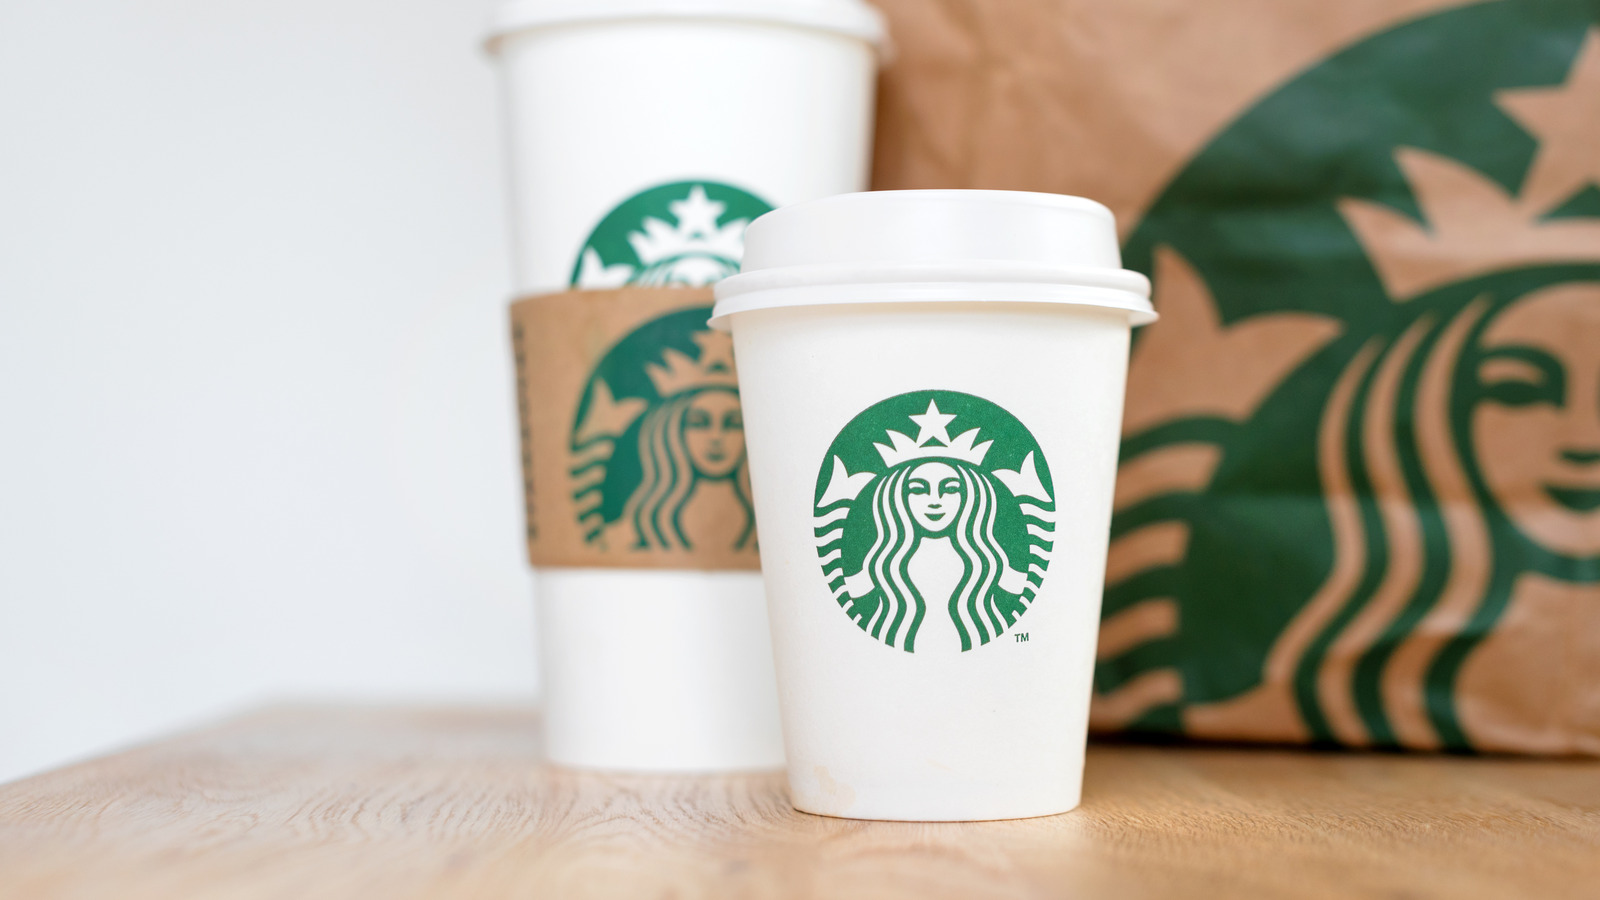 https://www.tastingtable.com/img/gallery/how-starbucks-got-the-names-for-its-cup-sizes/l-intro-1652367732.jpg